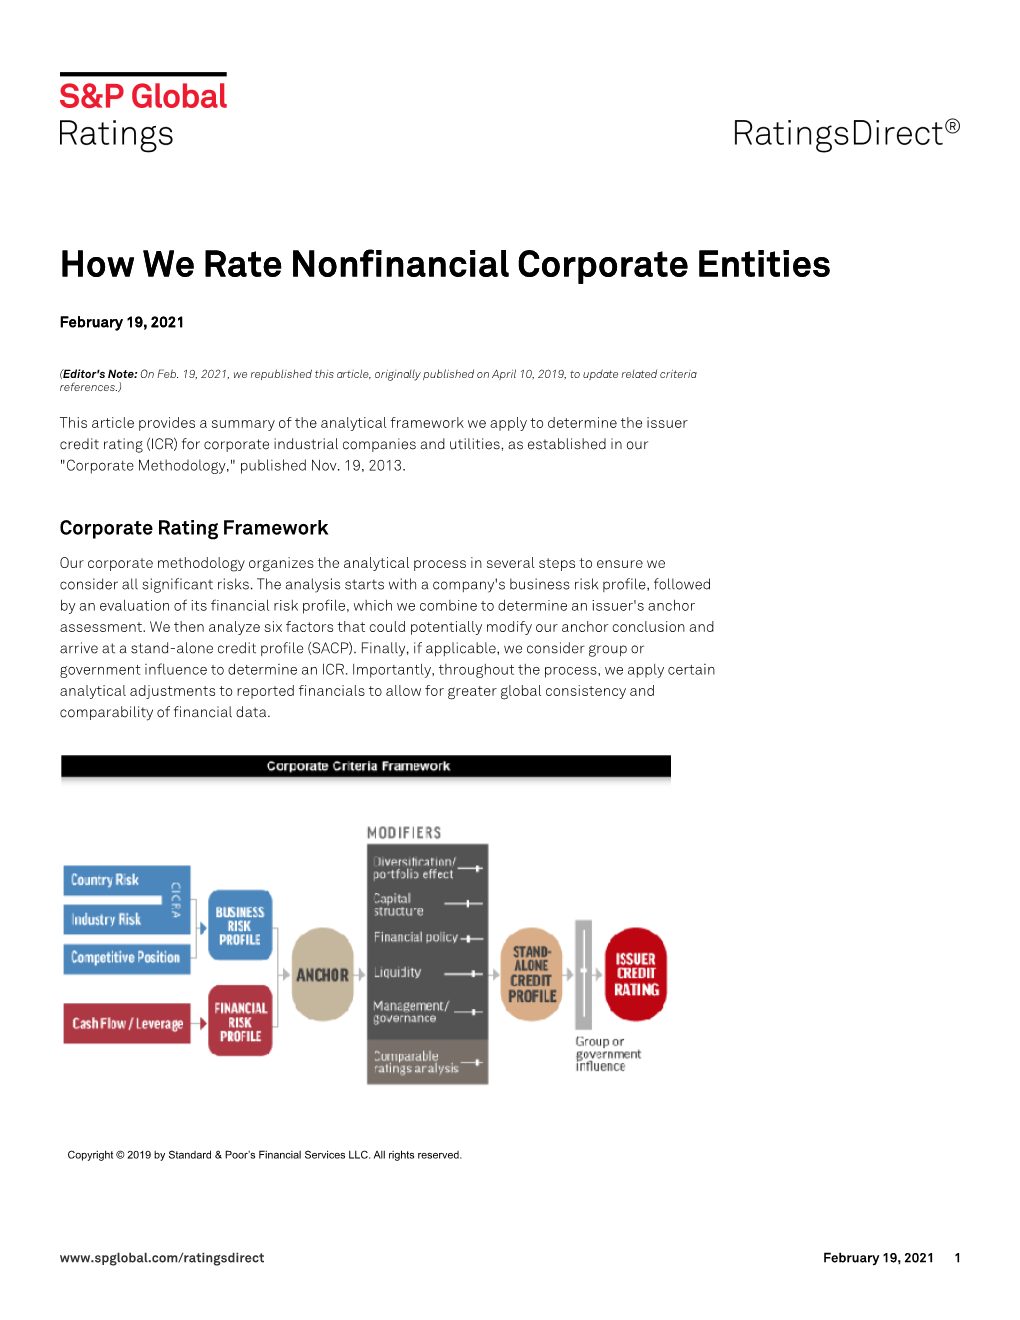 How We Rate Nonfinancial Corporate Entities